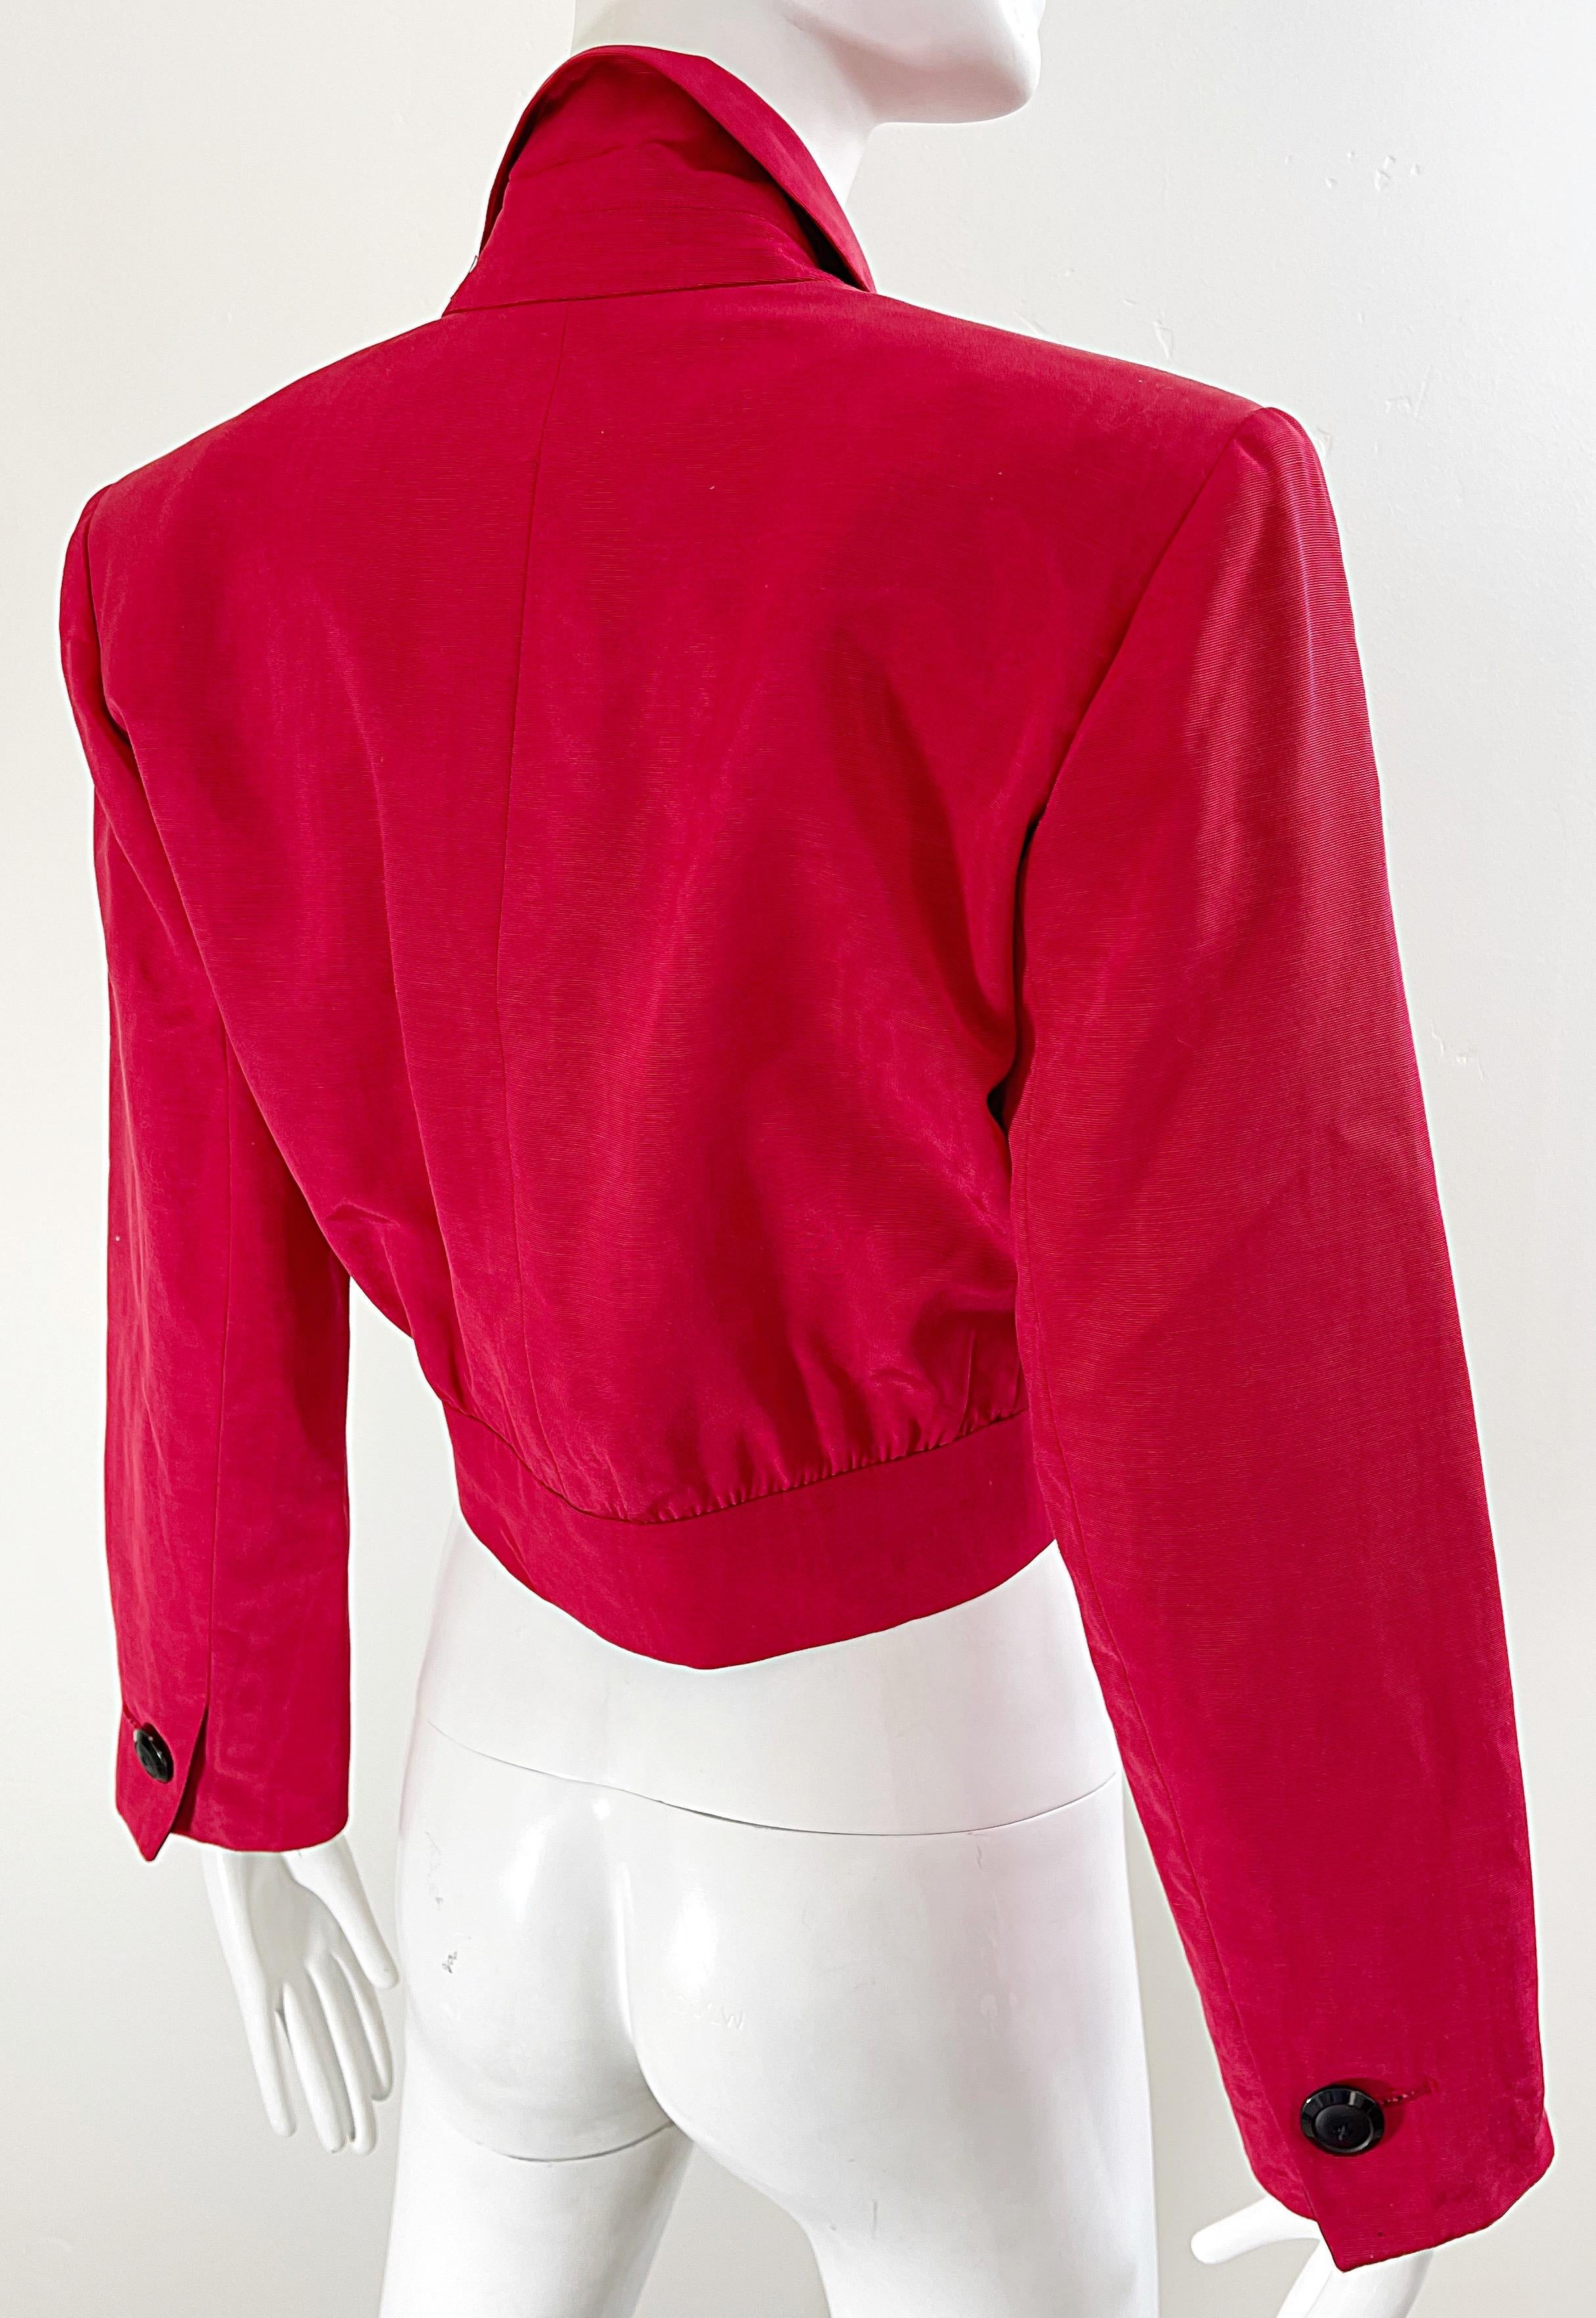 Yves Saint Laurent 1980s Red / Black Silk Cropped Vintage 80s Jacket Blazer YSL In Excellent Condition For Sale In San Diego, CA